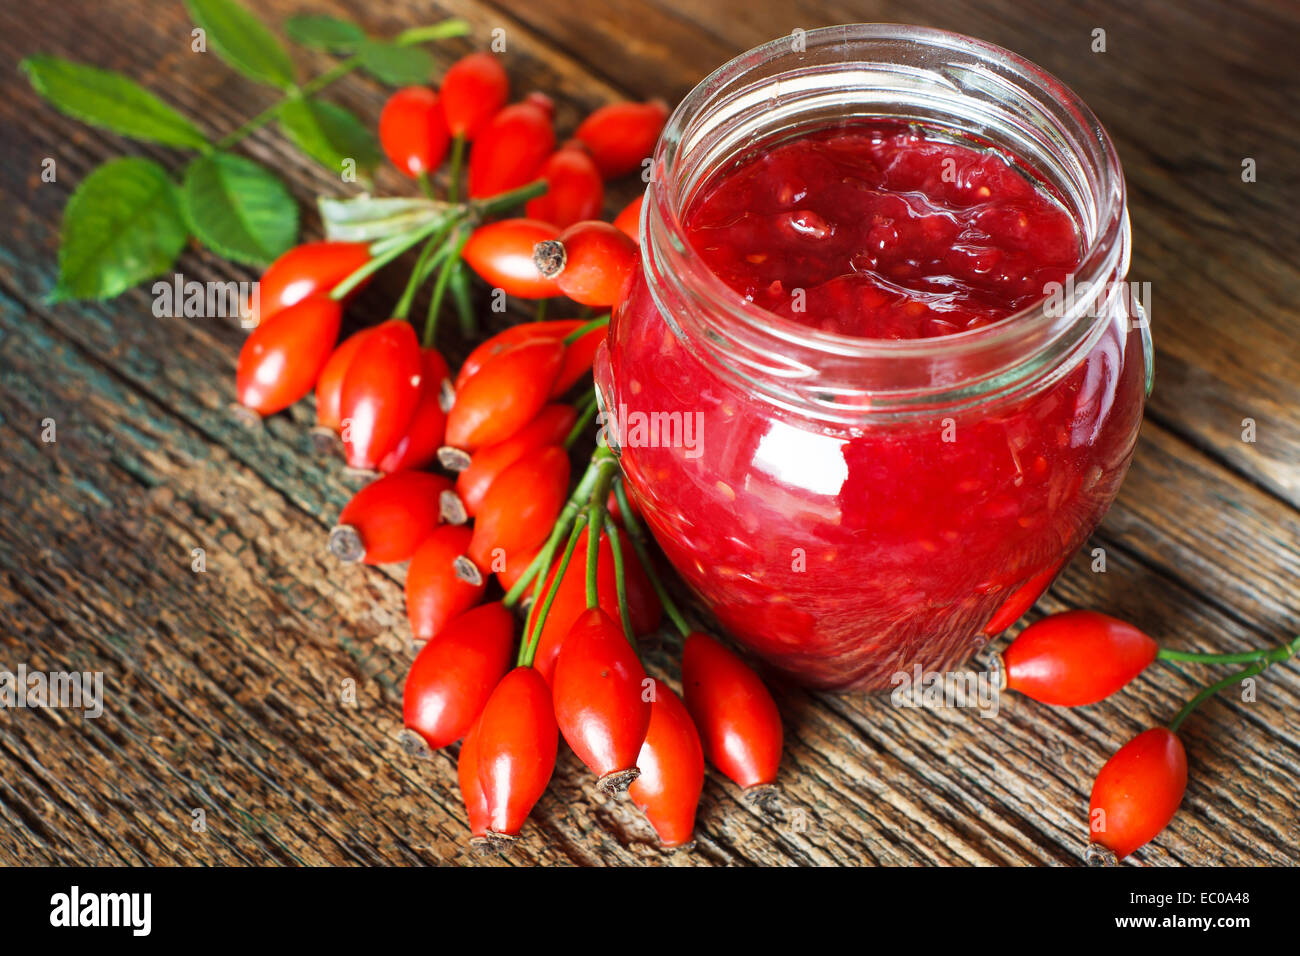 Jam with rose hips on wooden table Stock Photo